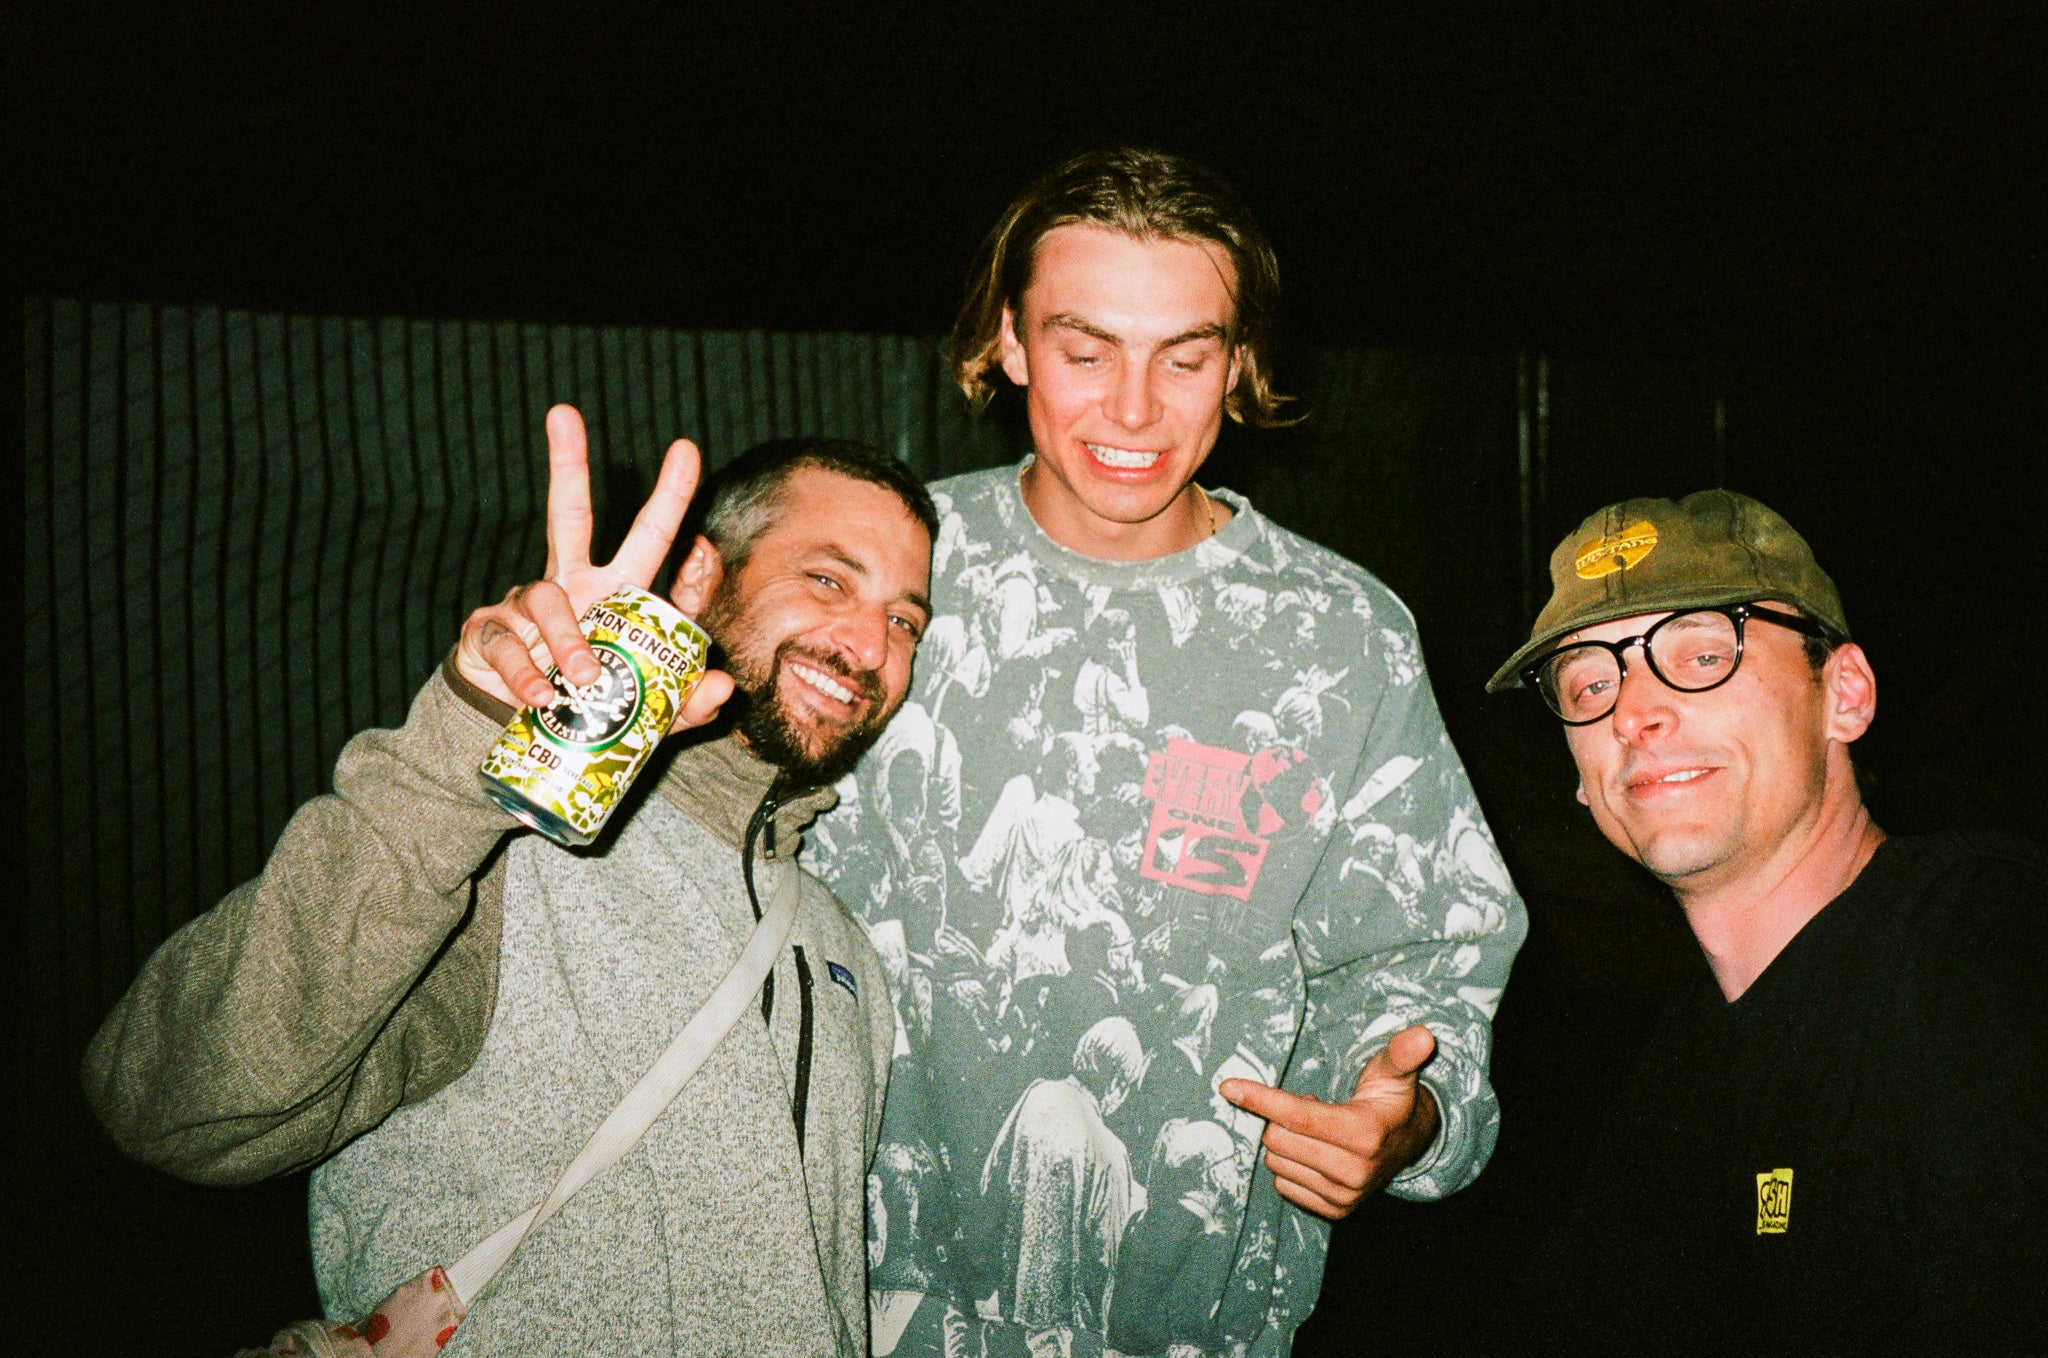 his photo is worth 7 grams. Marcus Rand, Keegan Hosefros and drunk Stan // p: Ted Borland